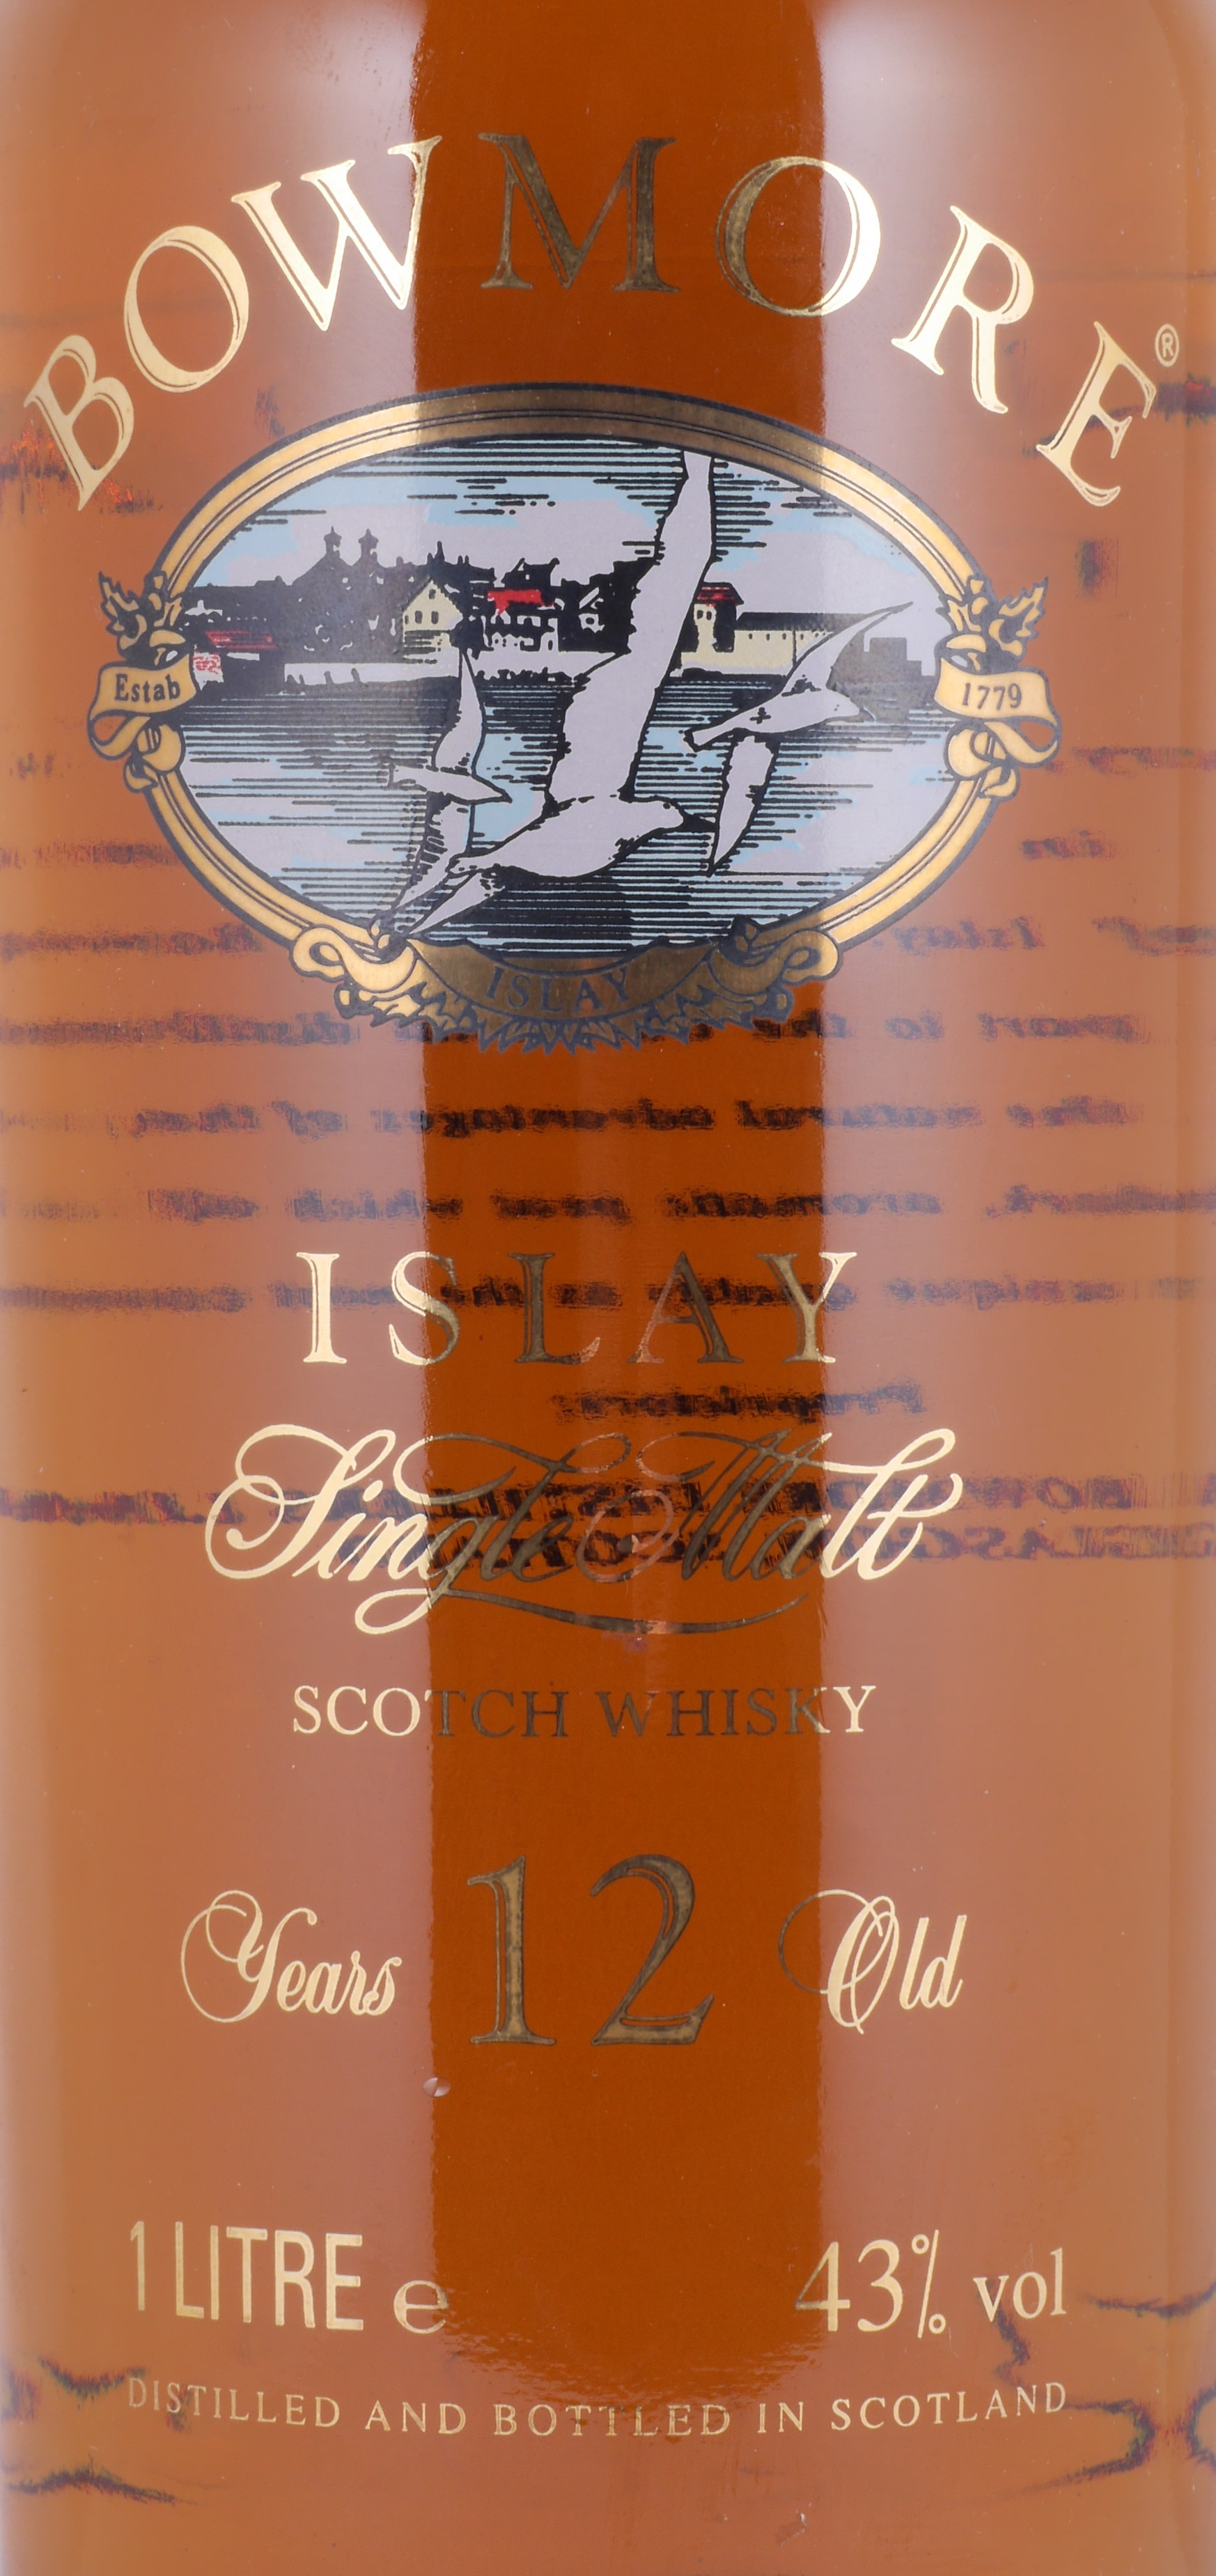 Buy Bowmore ABV Malt Single Scotch Whisky secure with at 3 Icons Label online 43.0% Printed AmCom 12 Islay Glass Years-old